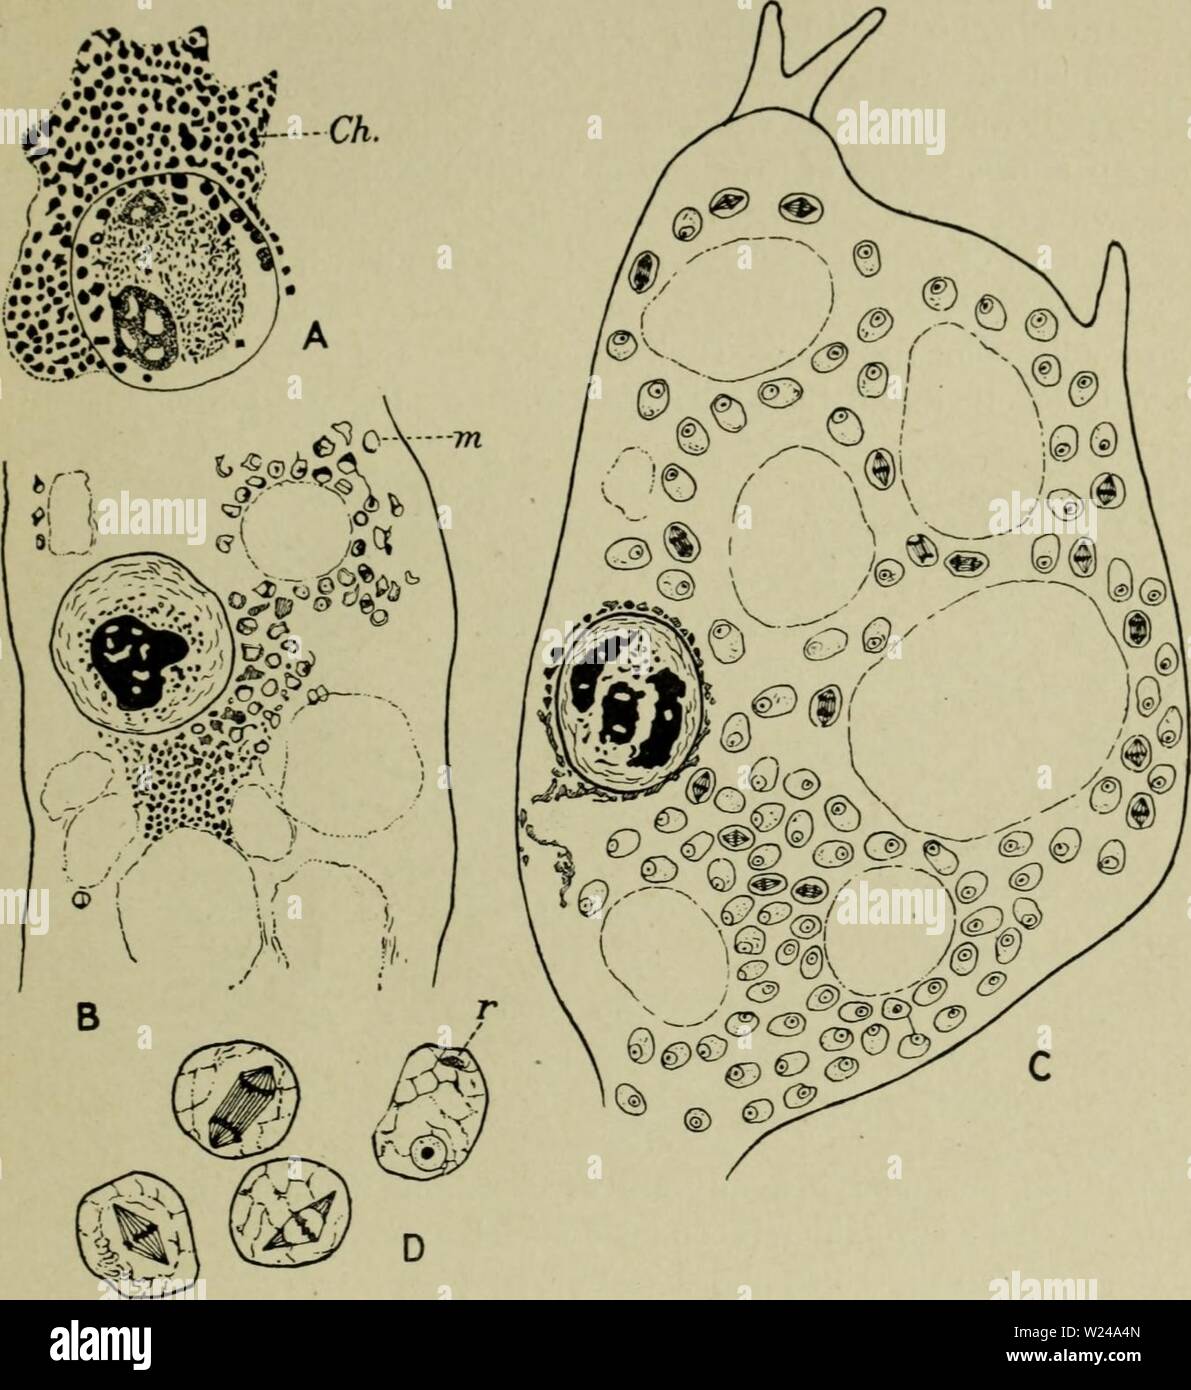 Archive image from page 222 of Cytology, with special reference to. Cytology, with special reference to the metazoan nucleus  cytologywithspec00agar 0 Year: 1920  vii CHROMIDIA IN PROTISTA 207 Another example of multiplication of nuclei by chromidia formation alternating with multiplication by mitotic division, though attended by more complications, is afforded by Arcella (Fig. 88), the life history of    Fig. 87. Stages in the formation of macrogametes in Mastigella vitrea. (After Goldschmidt, A.P.K., 1907.) A, macrogametocyte nucleus surrounded by extruded chromidia. B, a later stage. As the Stock Photo